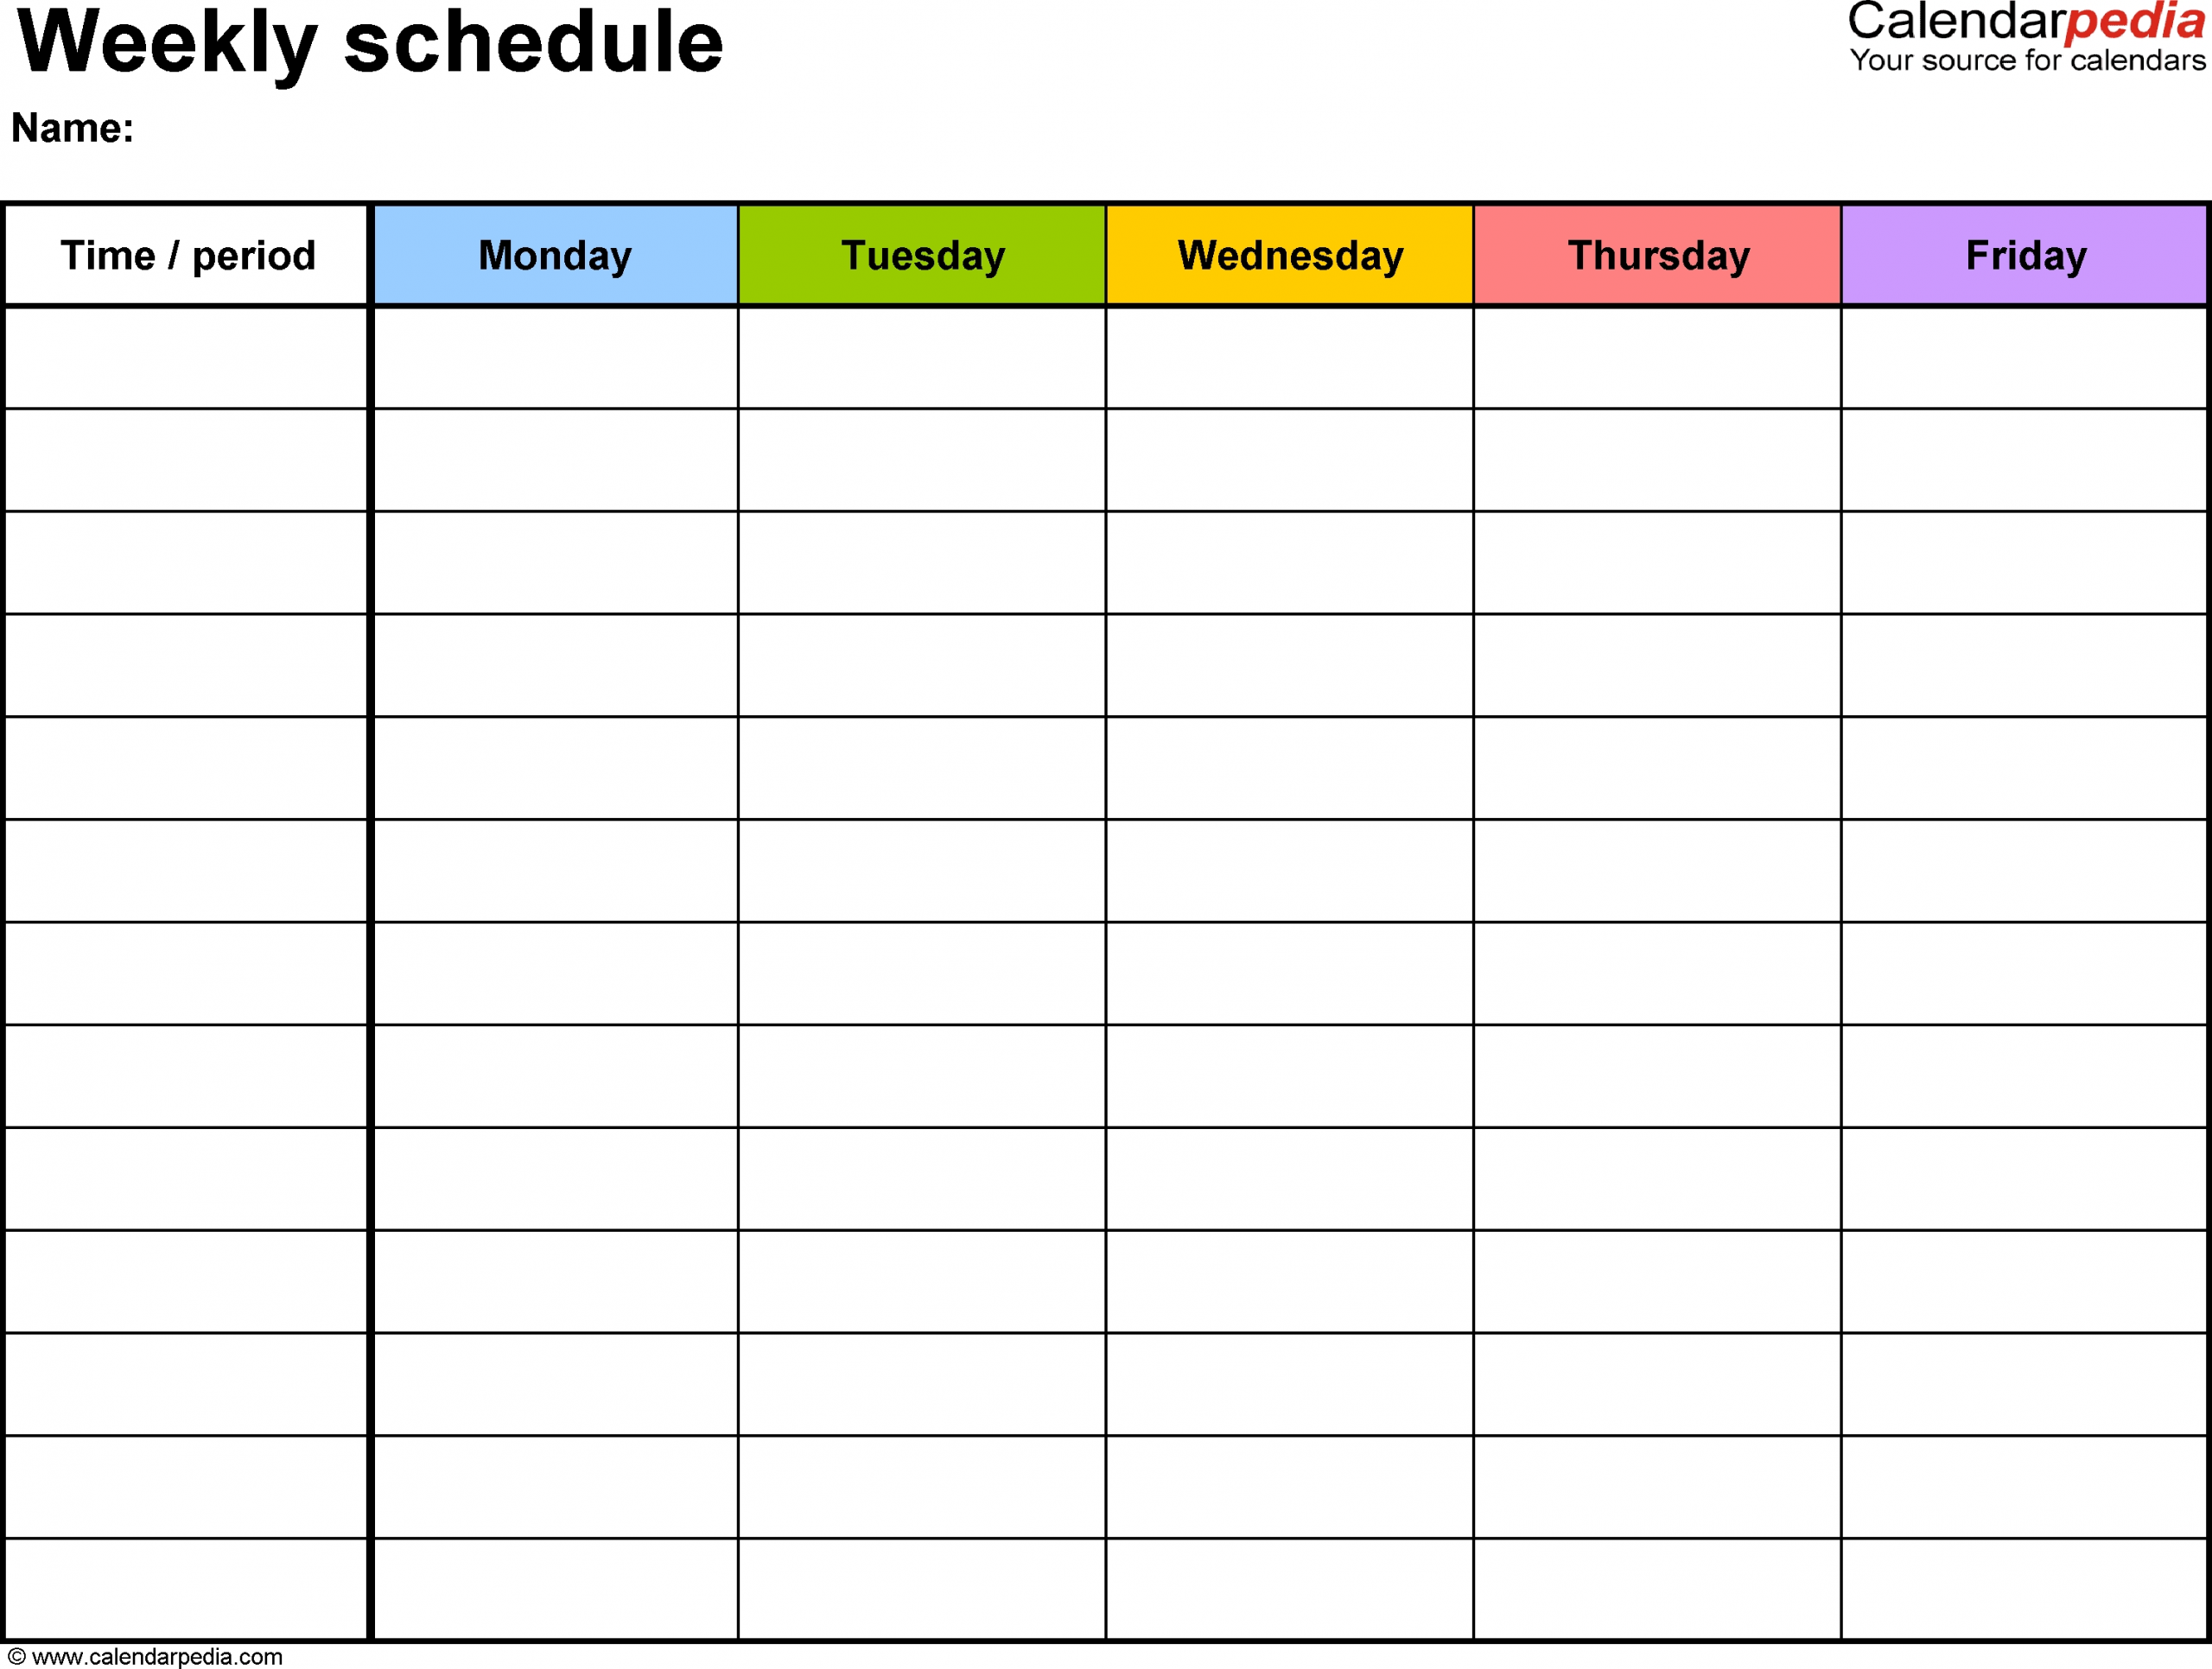 Free Weekly Schedule Templates For Word - 18 Templates in Combined Monthly And Weekly Calendar Template Word